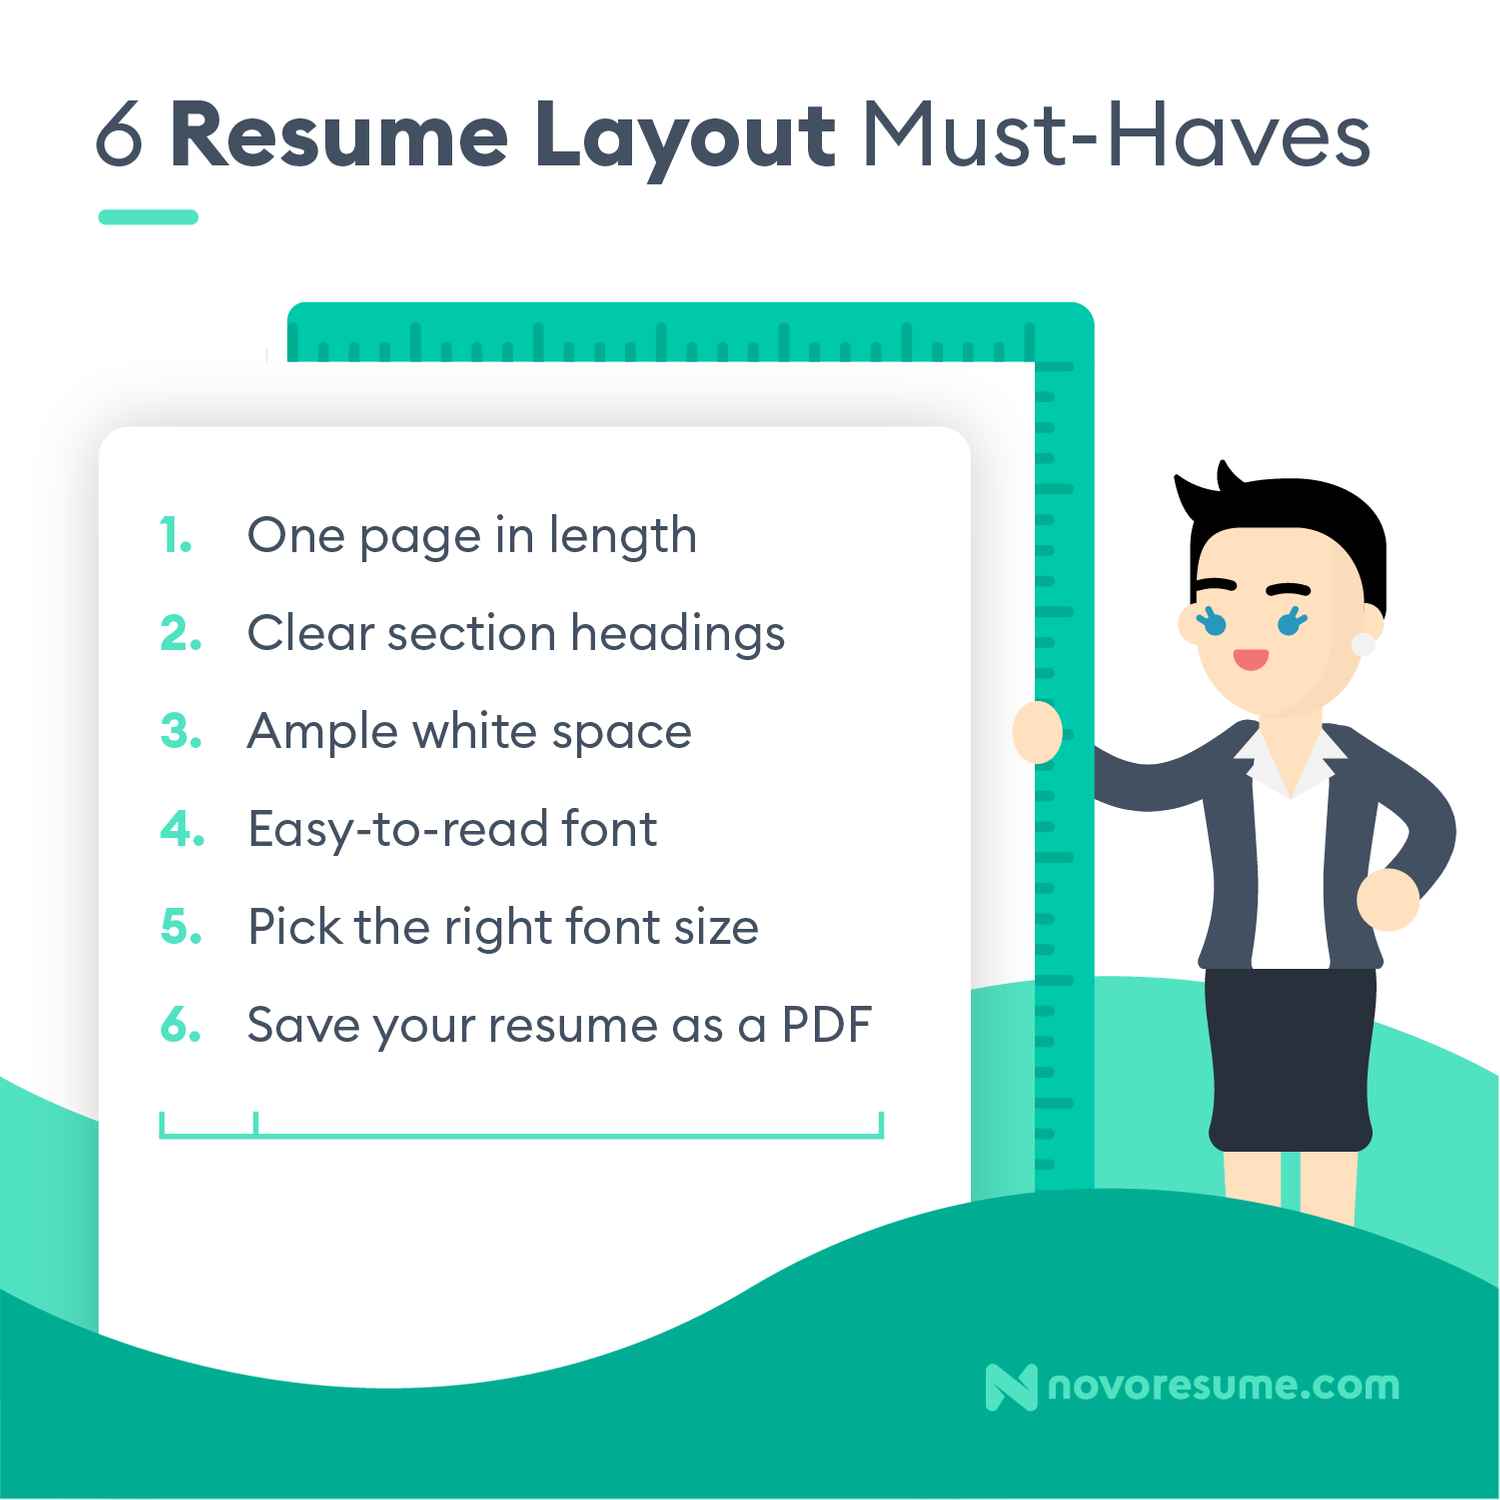 resume layout must haves